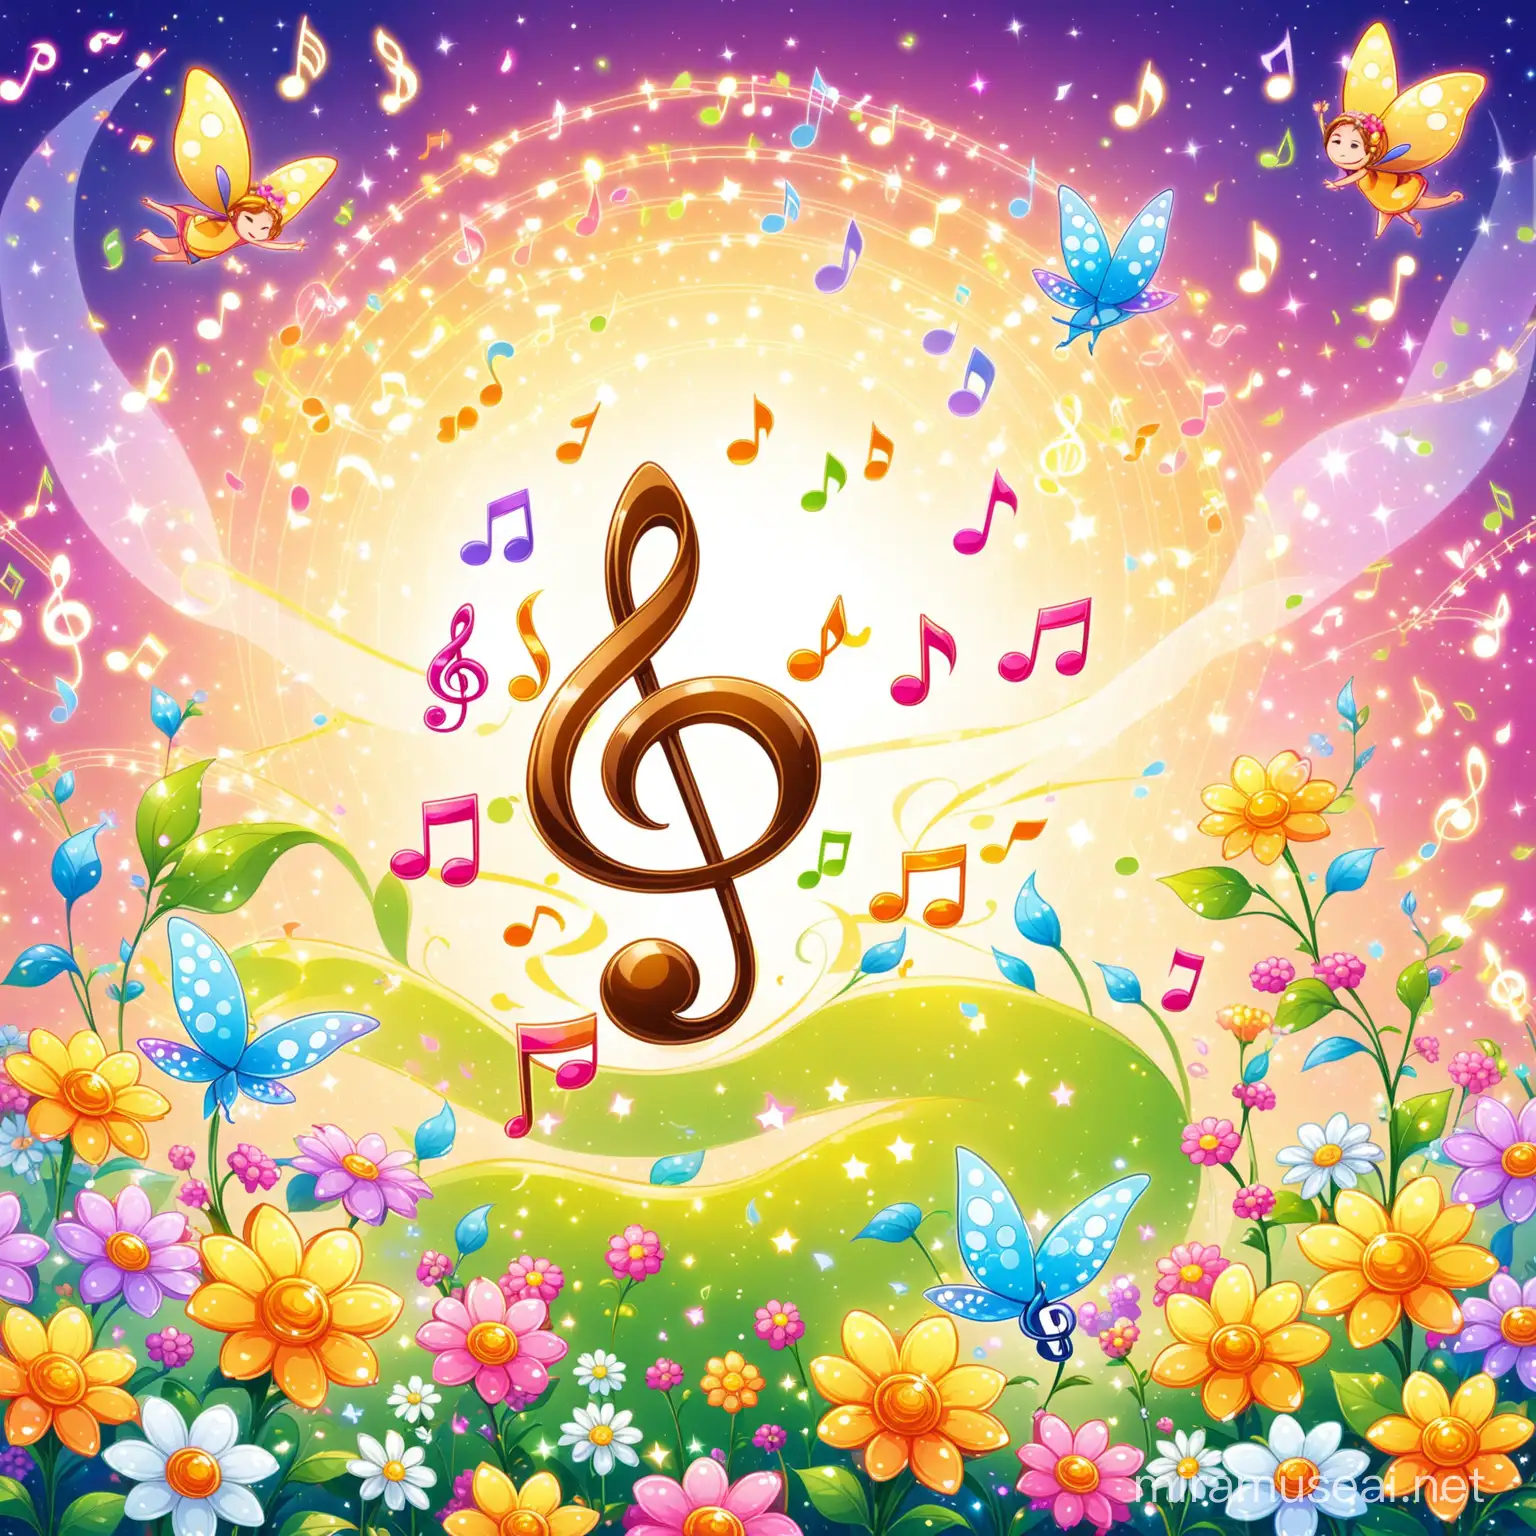 Whimsical Cartoon Music Stave with Floral Fairies